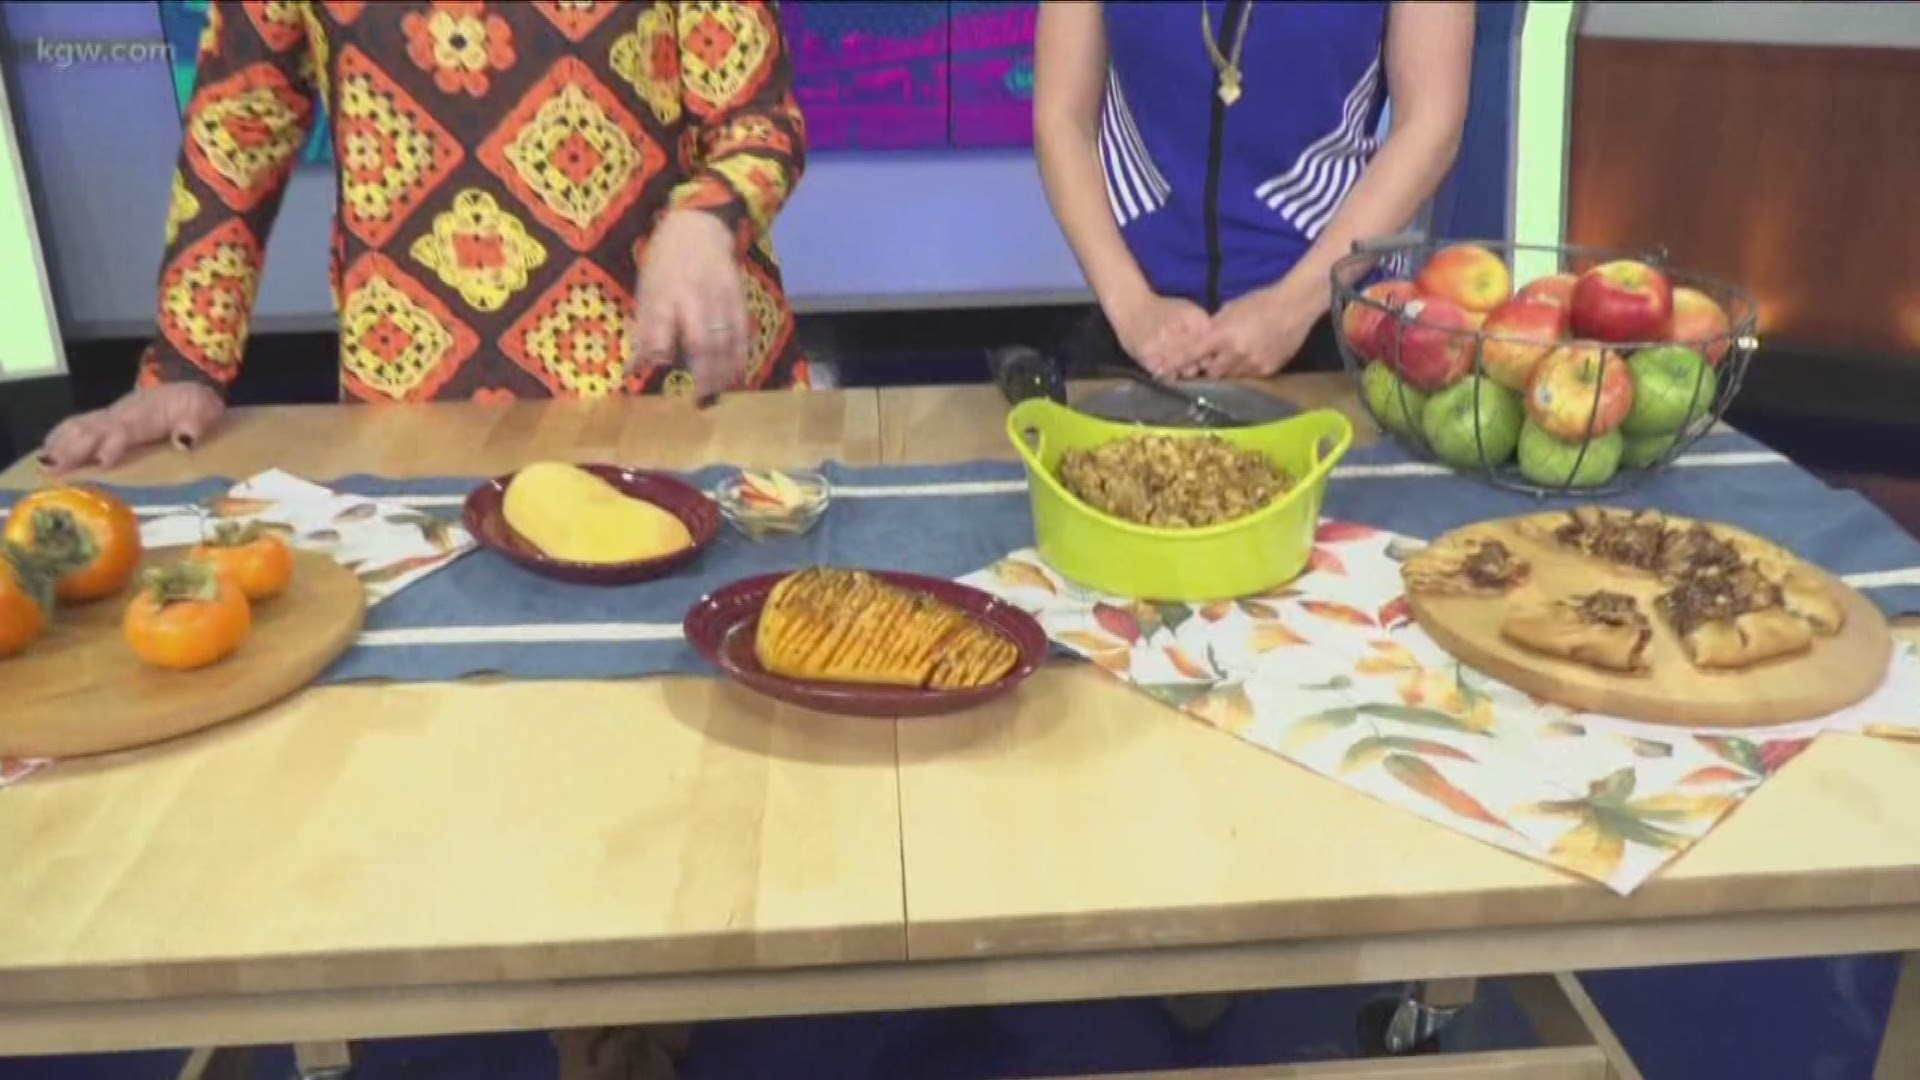 Shannon Feltus from Urban Farm Foods joined us in the studio to show off some dishes that are perfect for the season and just in time for Thanksgiving! That includes